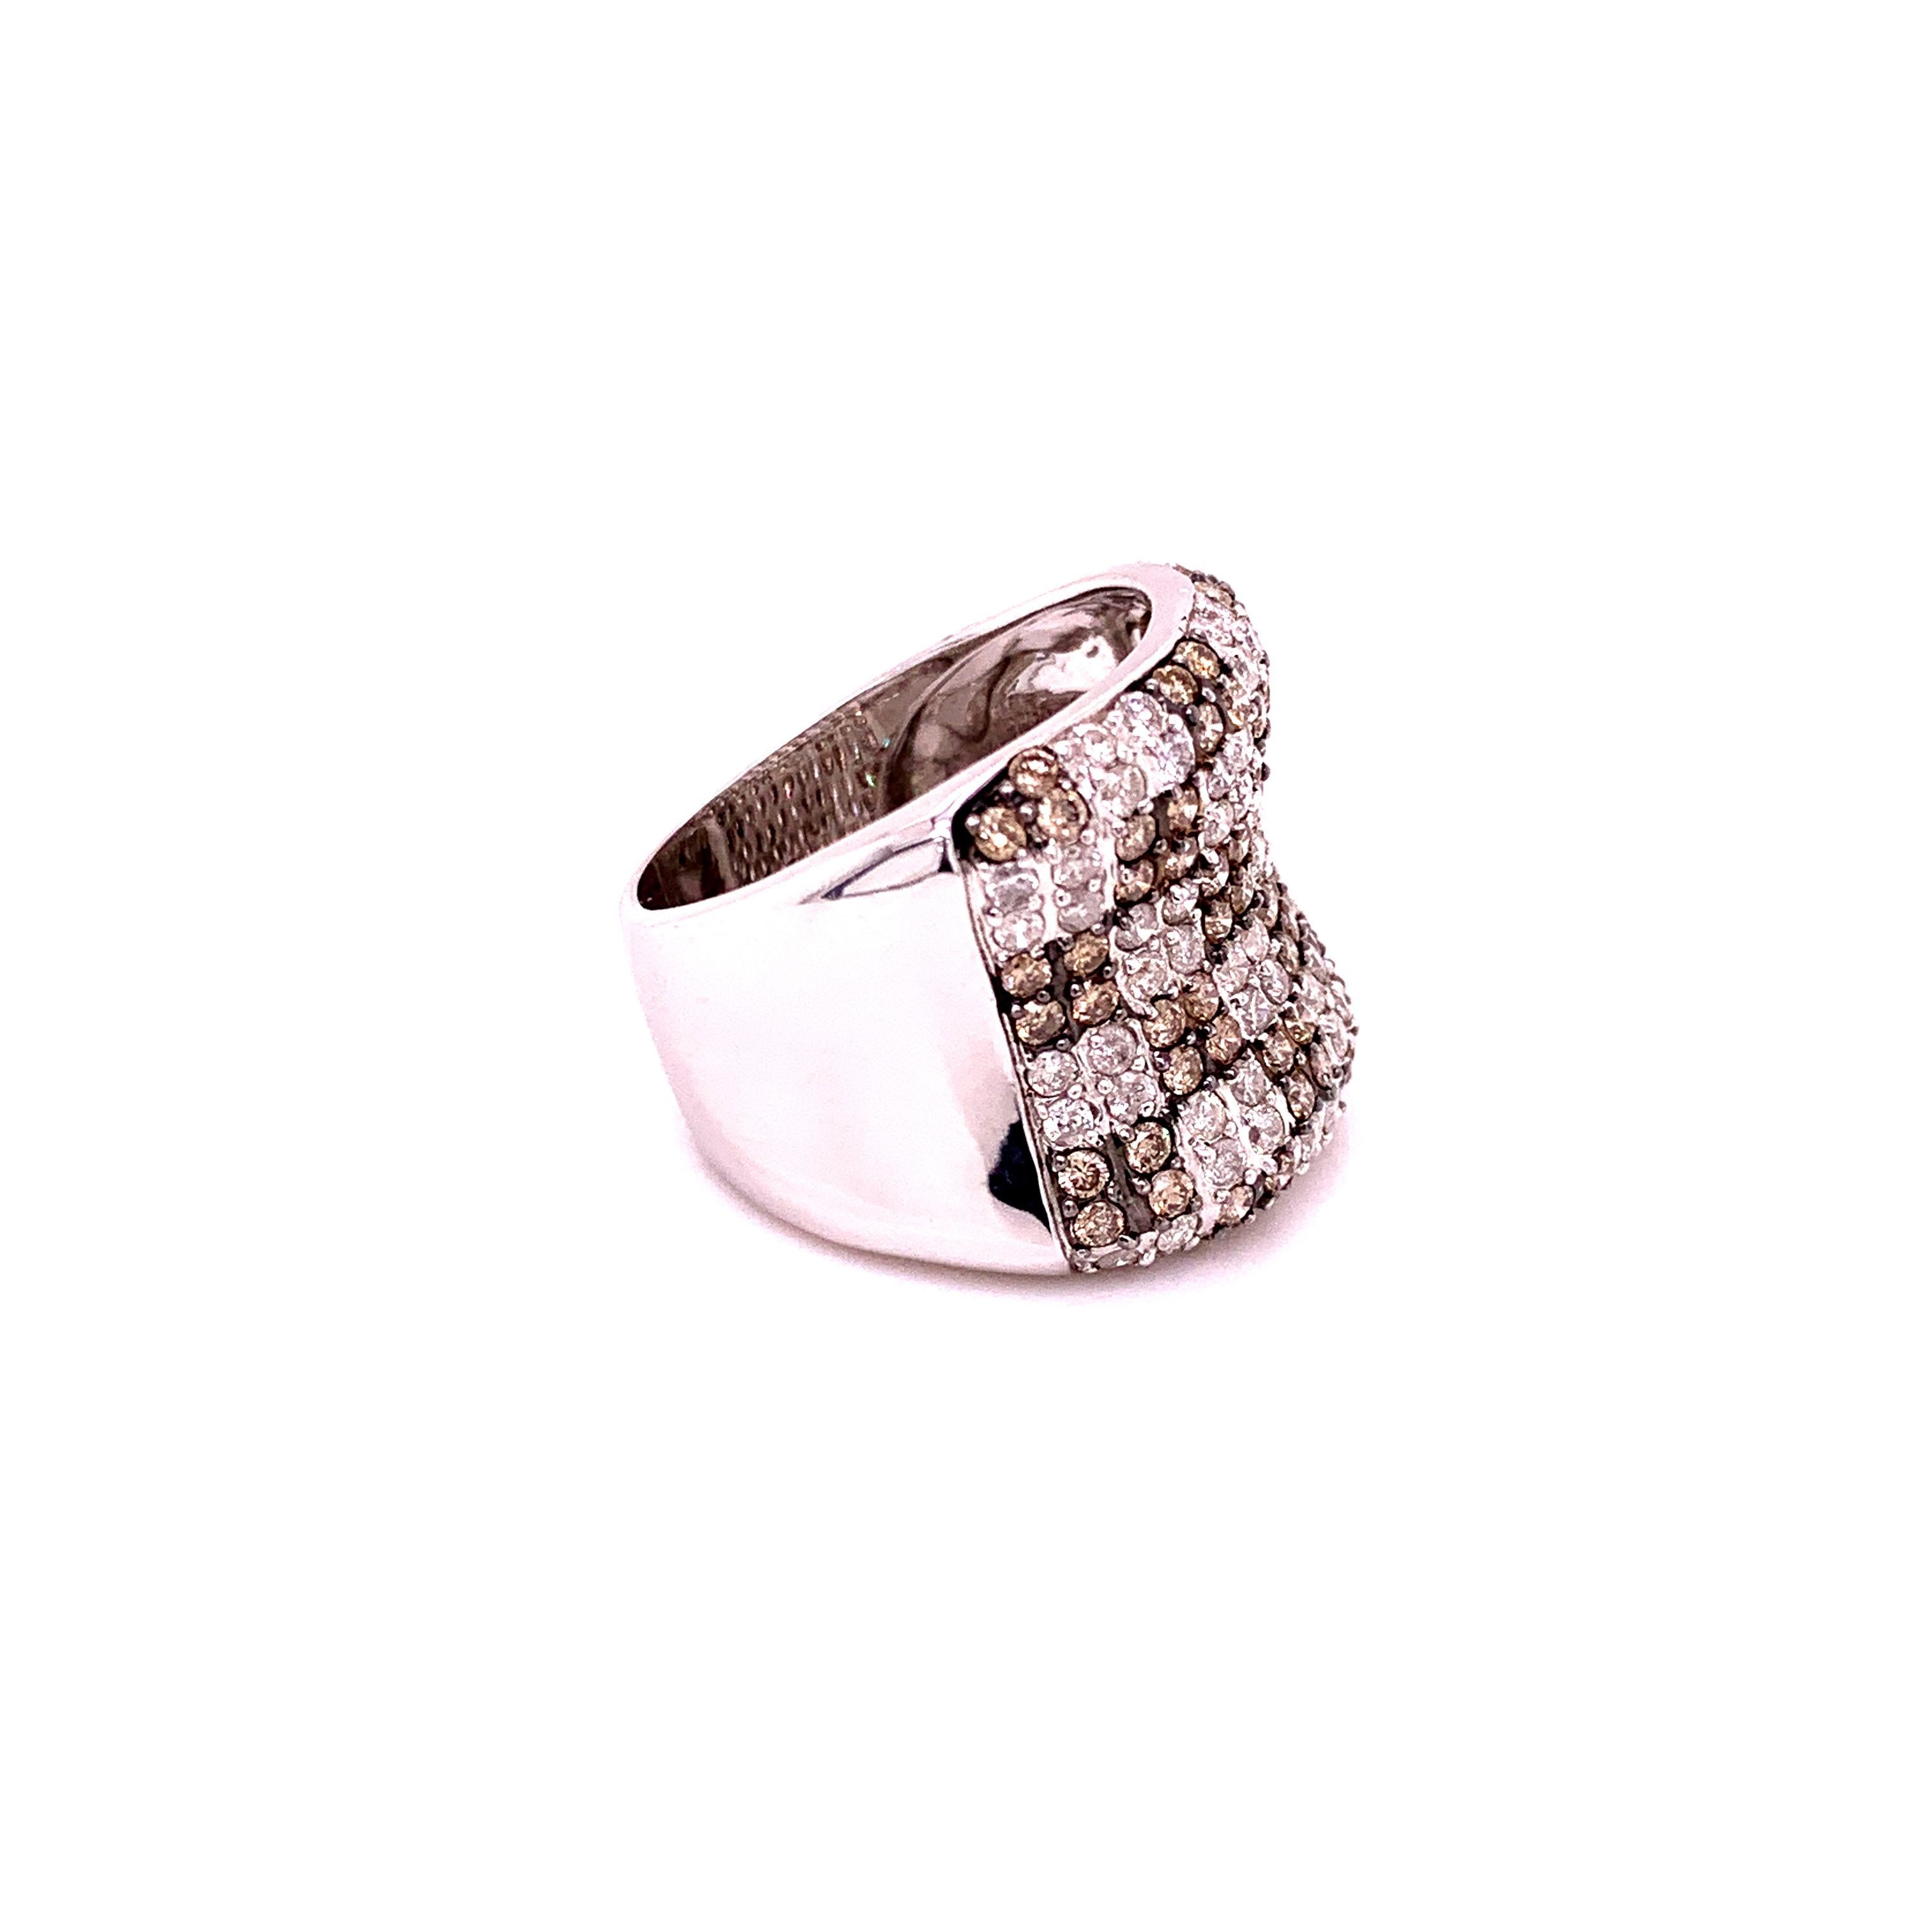 Stunning fancy brown diamond cocktail ring. High lustre, a round brilliant cut fancy brown diamond with round brilliant cut diamond mounted in an oxidized checkered pattern.  Handcrafted beautiful wide band design set in high polished 14 karats